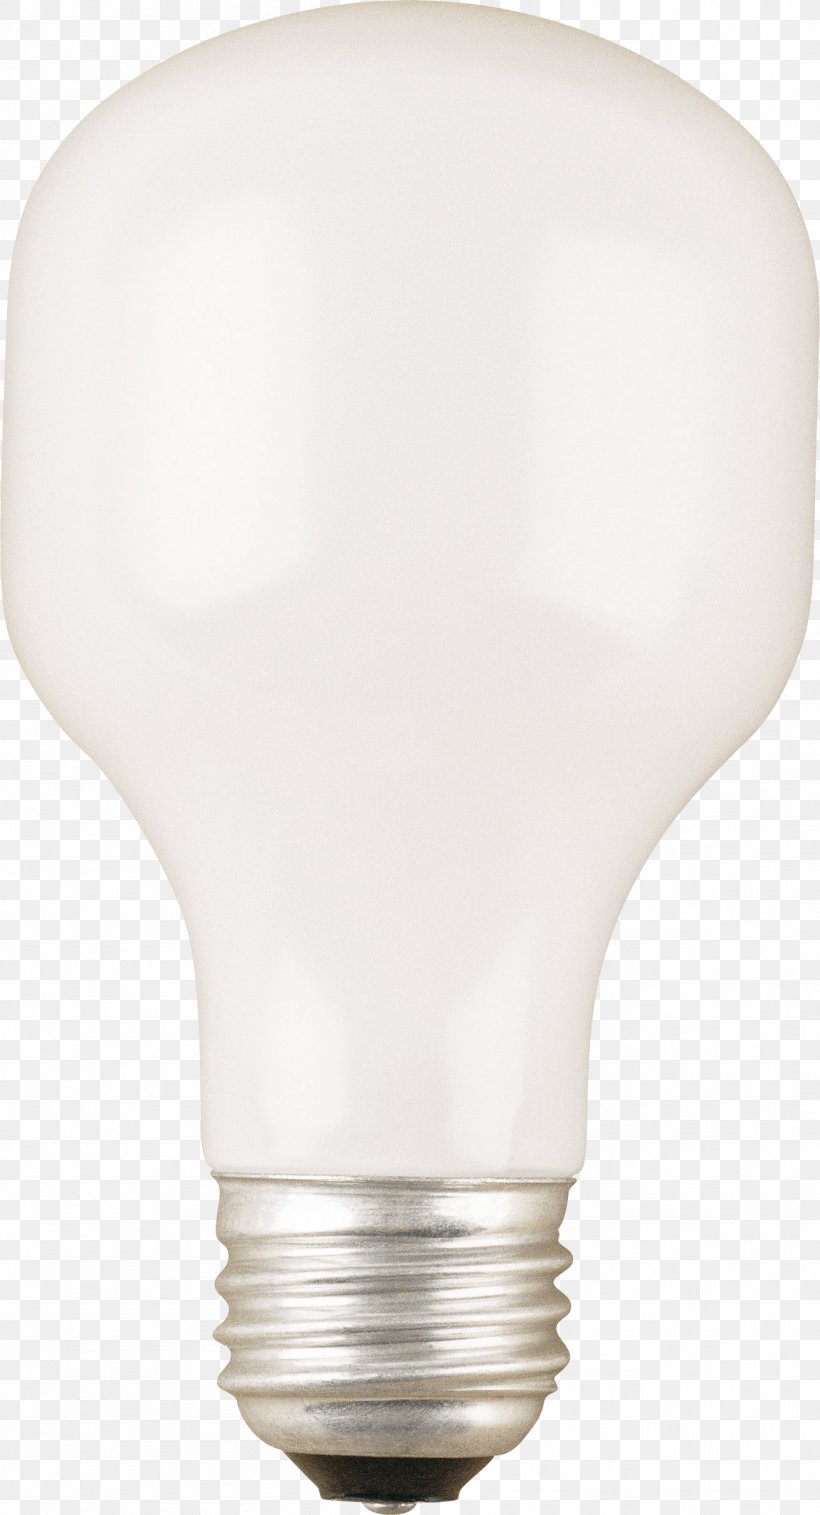 Incandescent Light Bulb, PNG, 1308x2418px, Light, Incandescent Light Bulb, Light Bulb, Lighting, Product Design Download Free